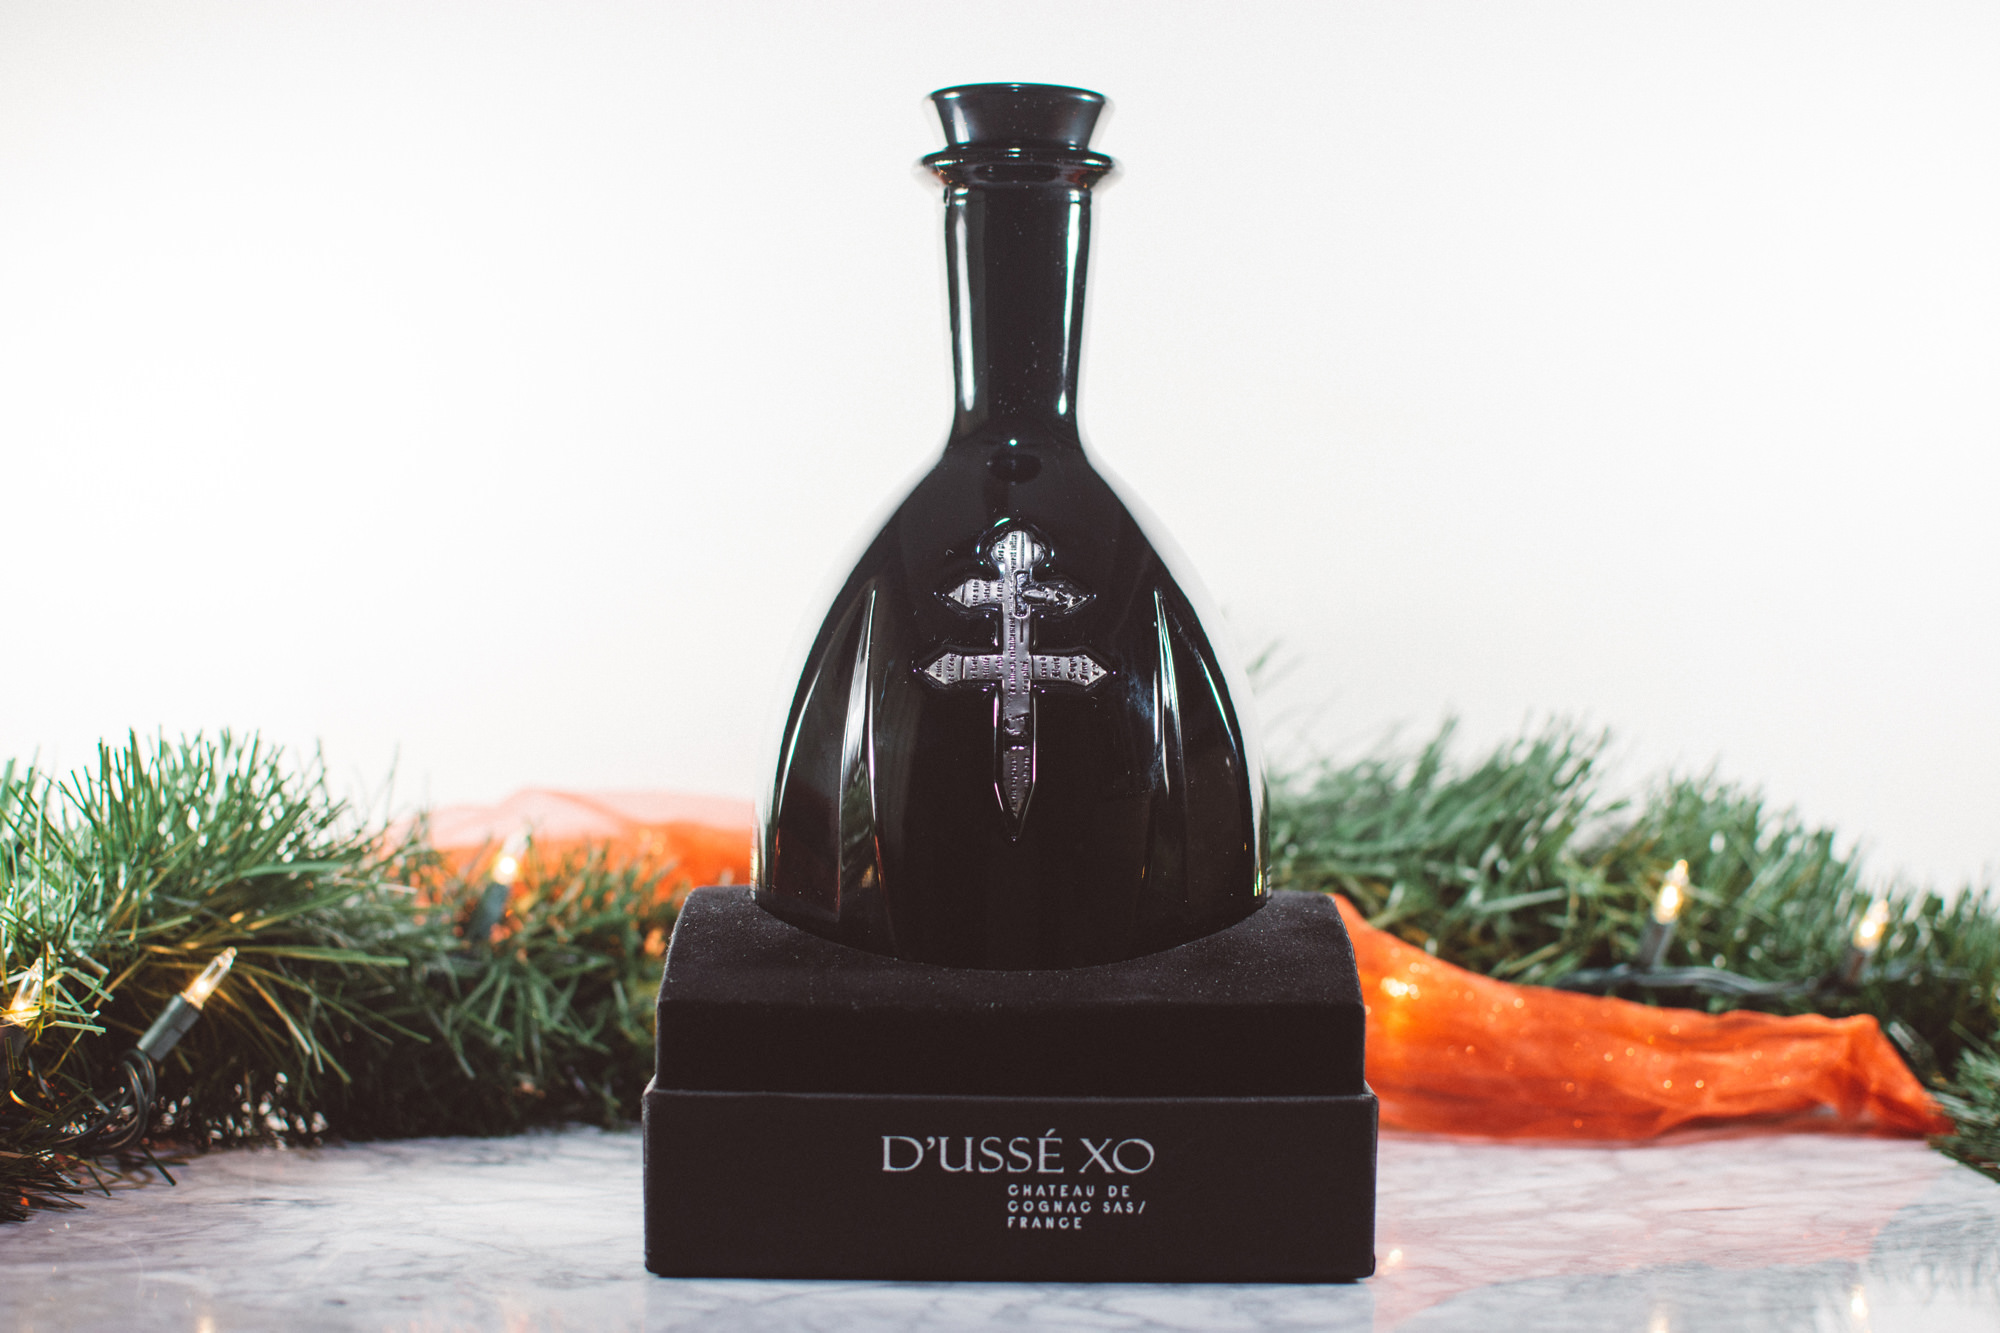 2017 Spirits Gift Guide featuring D'usse